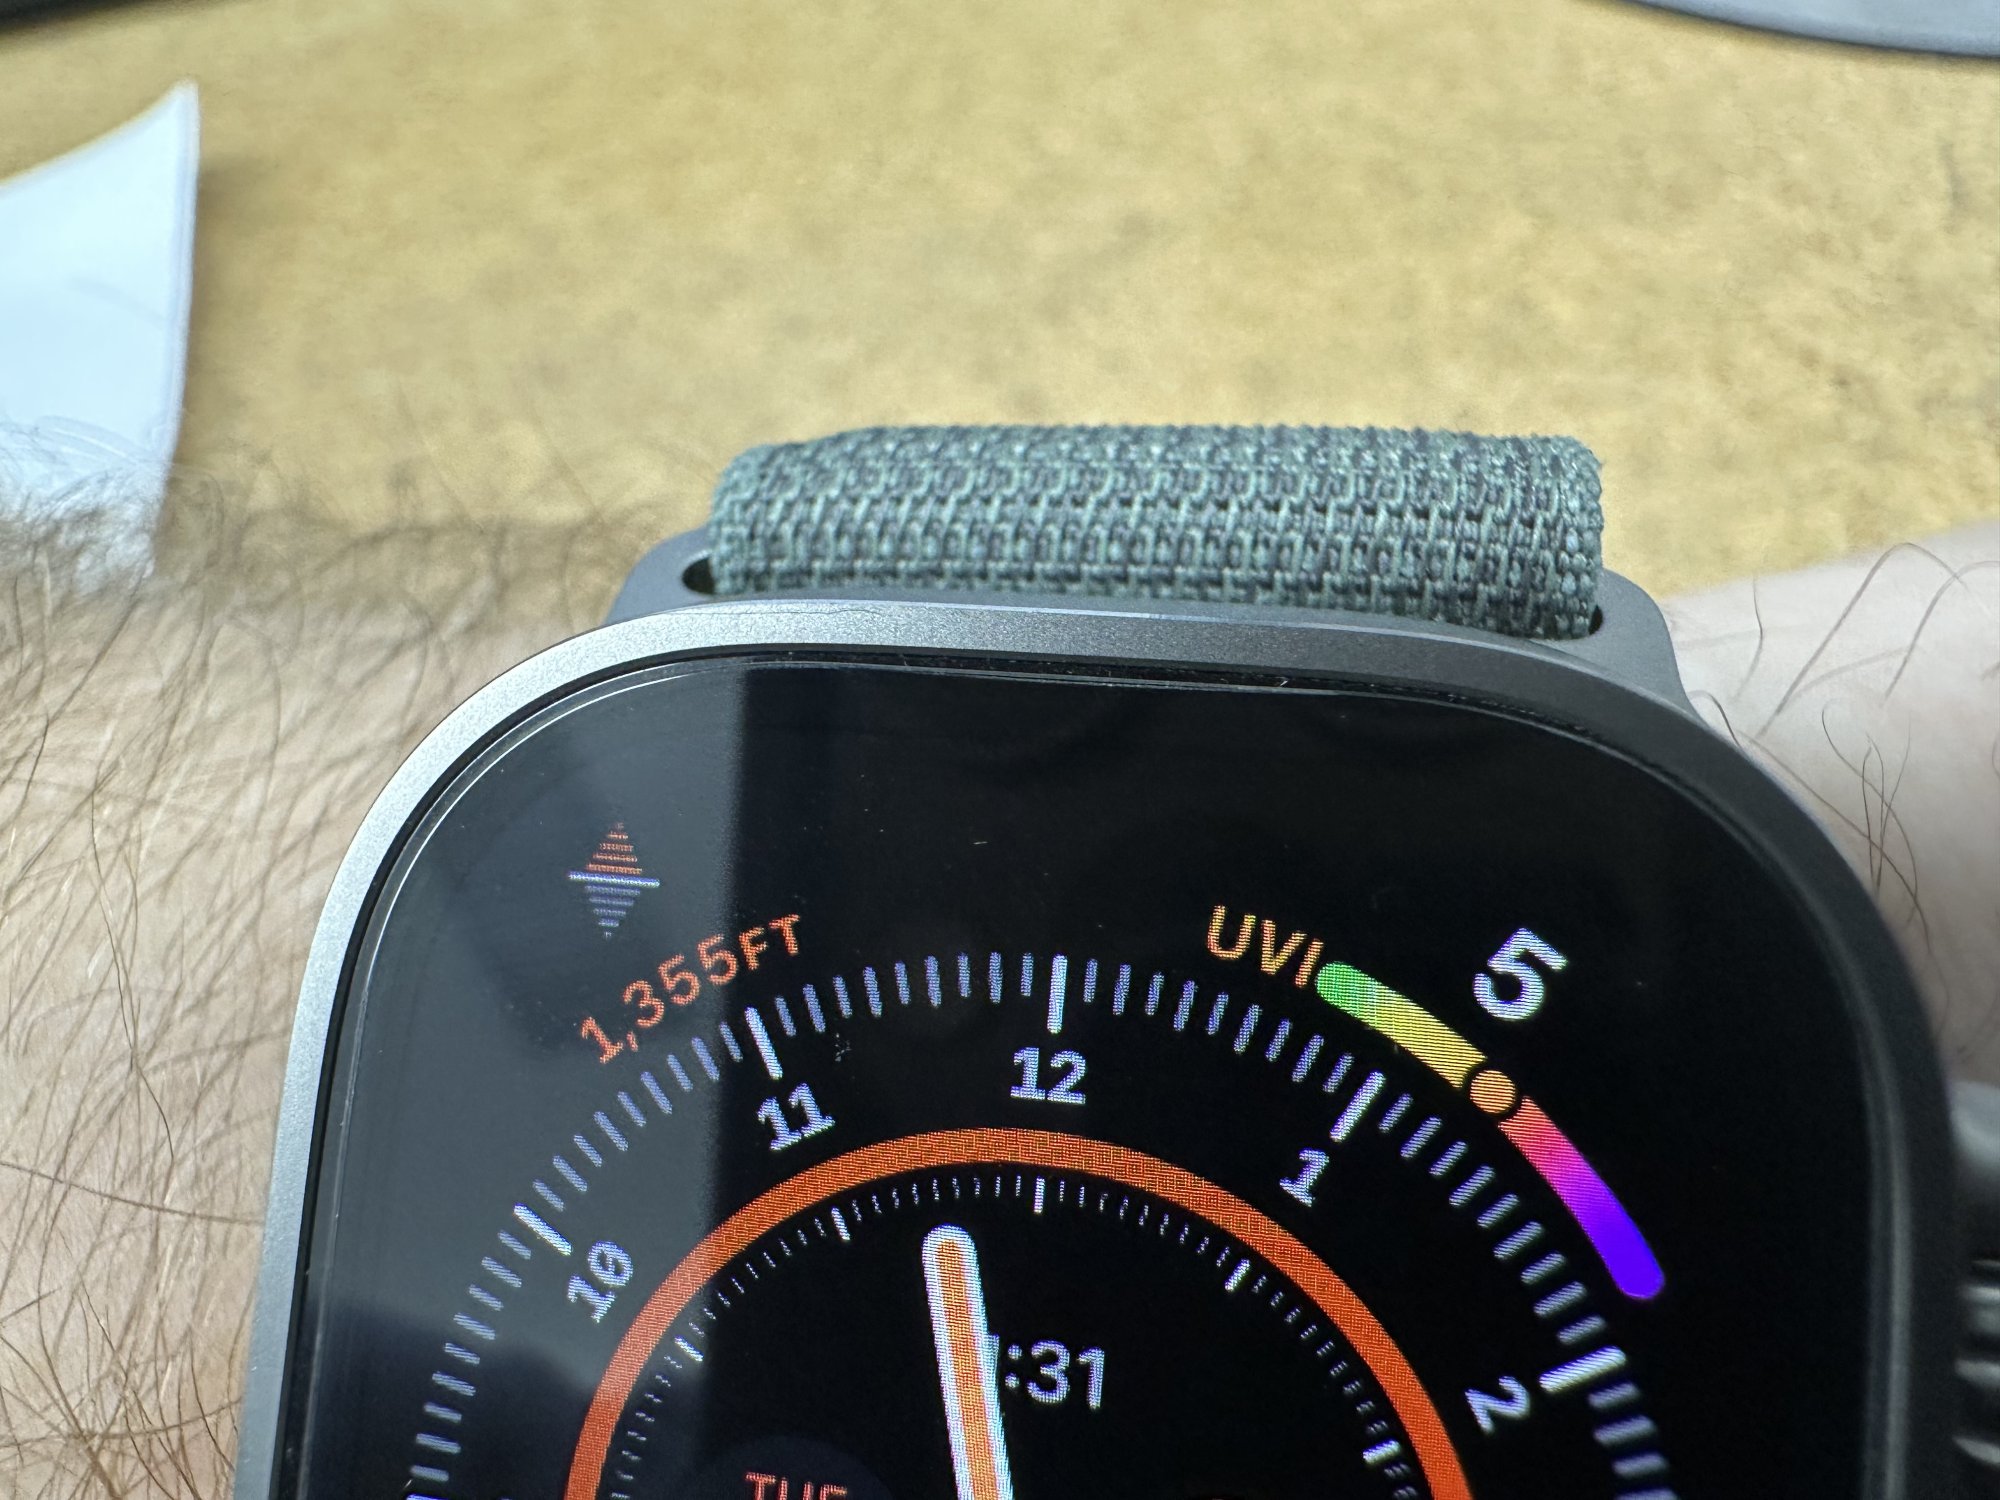 How to Avoid and Remove Scratches on the Apple Watch Screen